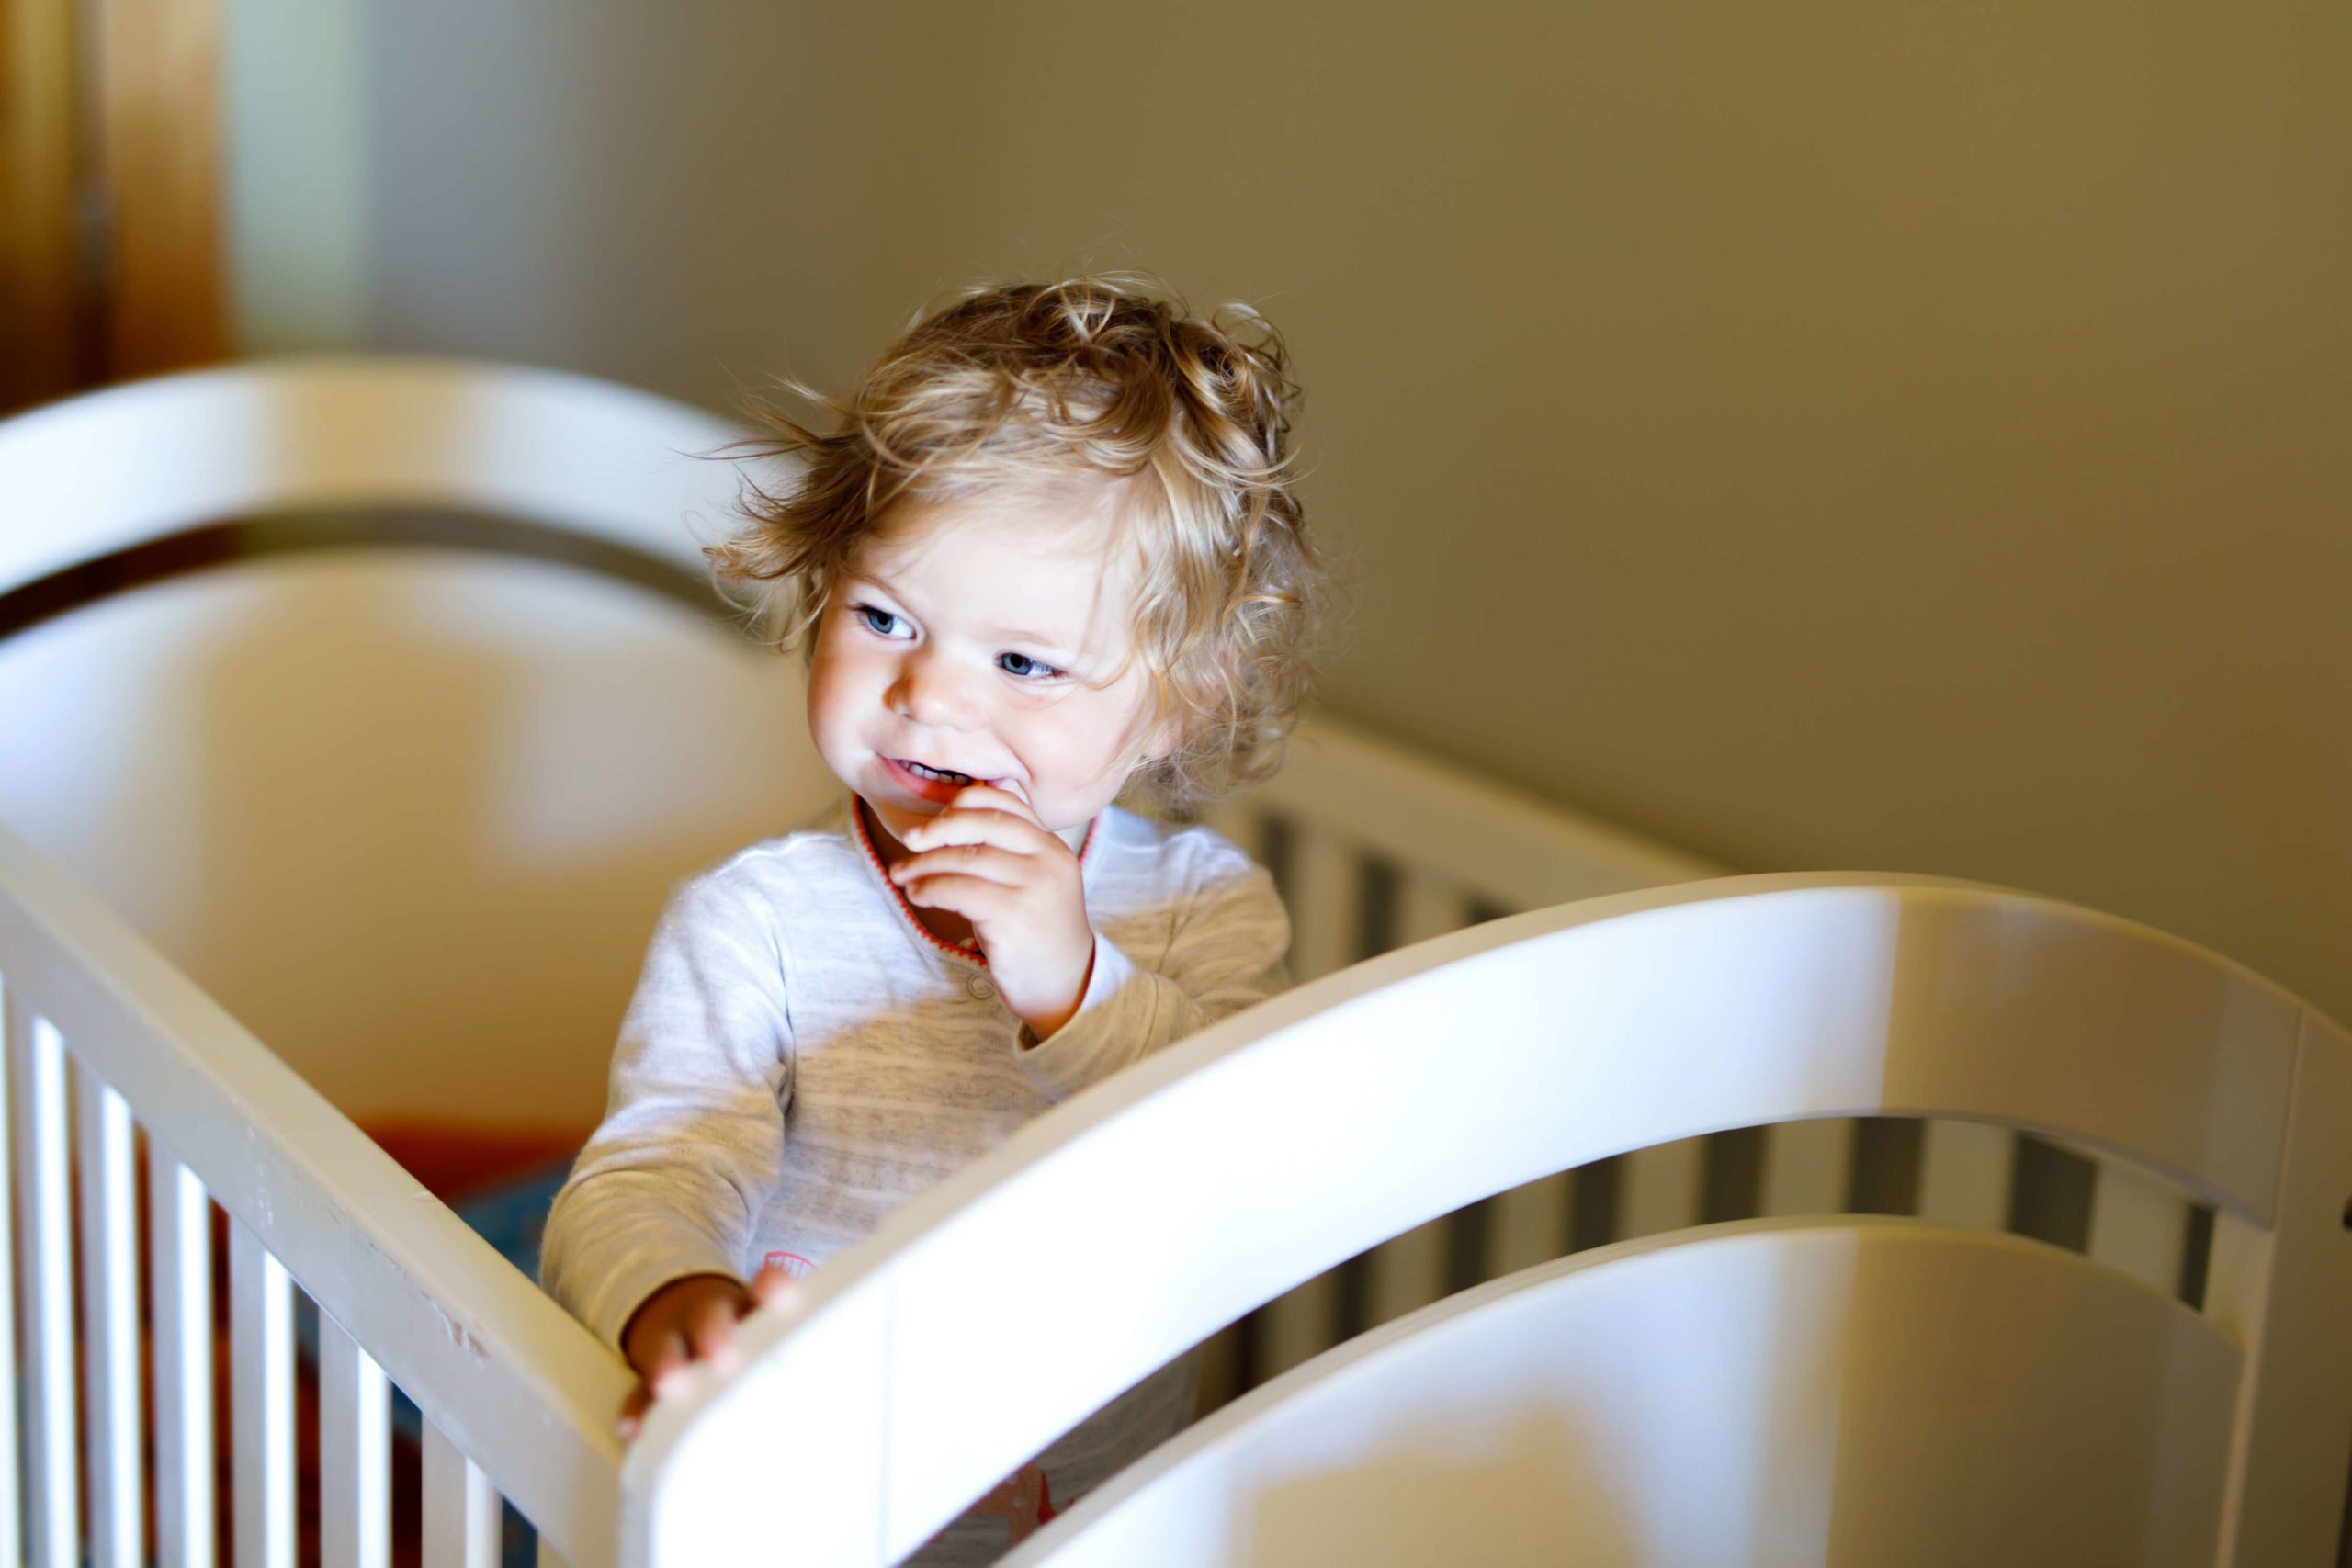 Why won't my toddler sleep? 8 things to try